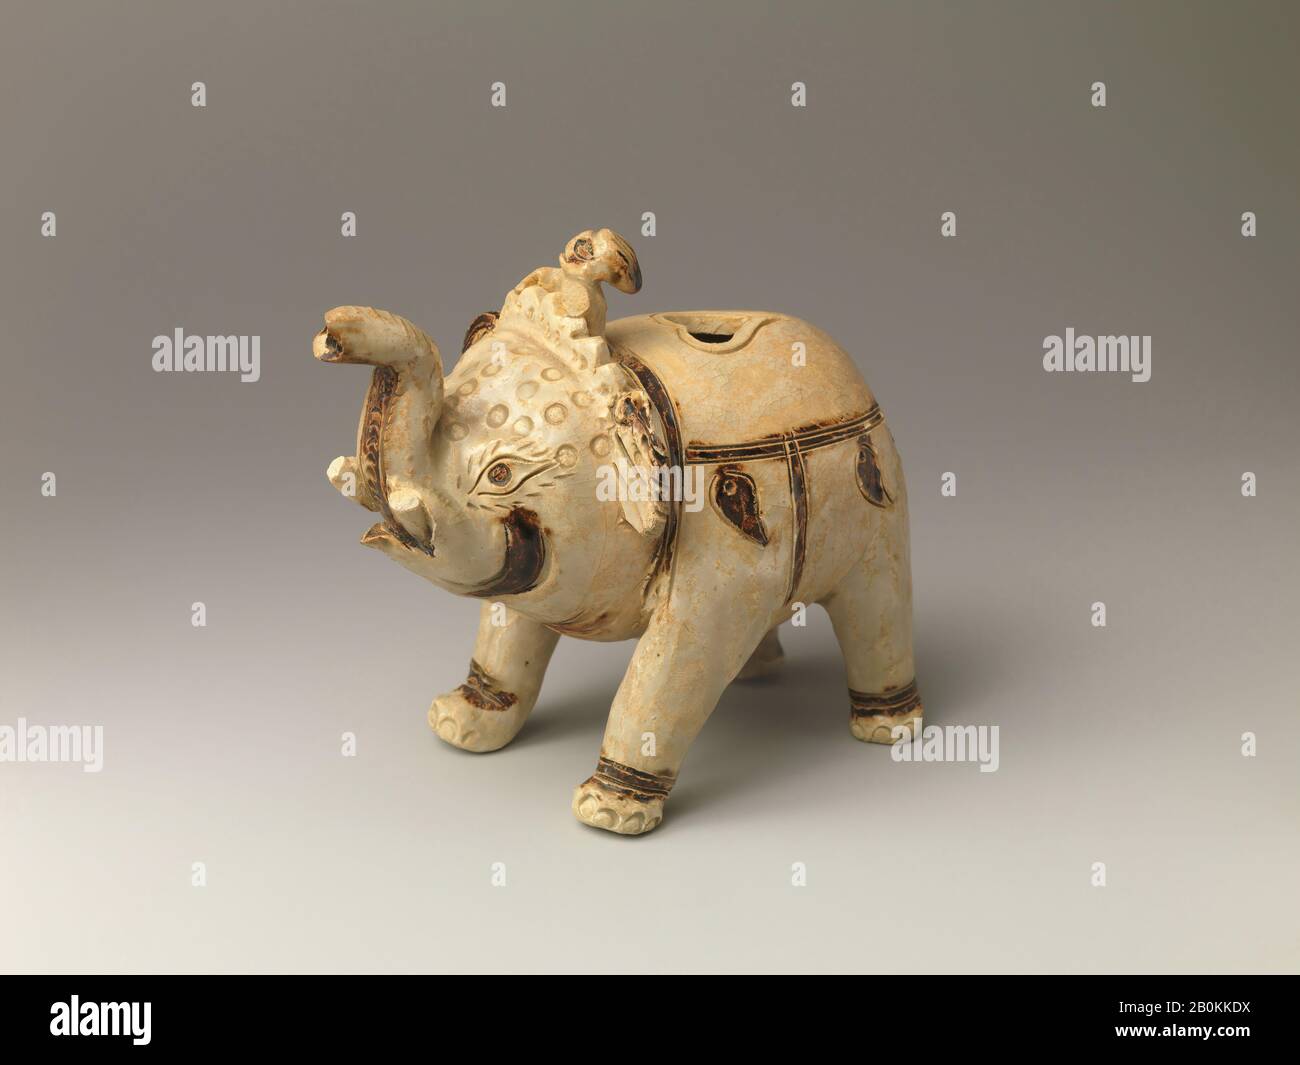 Ewer in the Form of an Elephant, Vietnam, Ly dynasty (1009–1225), Date 11th–12th century, Vietnam, Glazed pottery with incised and inlaid decoration, H. 4 3/4 in. (12.1 cm); W. 3 1/8 in. (7.9 cm); L. 5 3/8 in. (13.7 cm), Ceramics Stock Photo